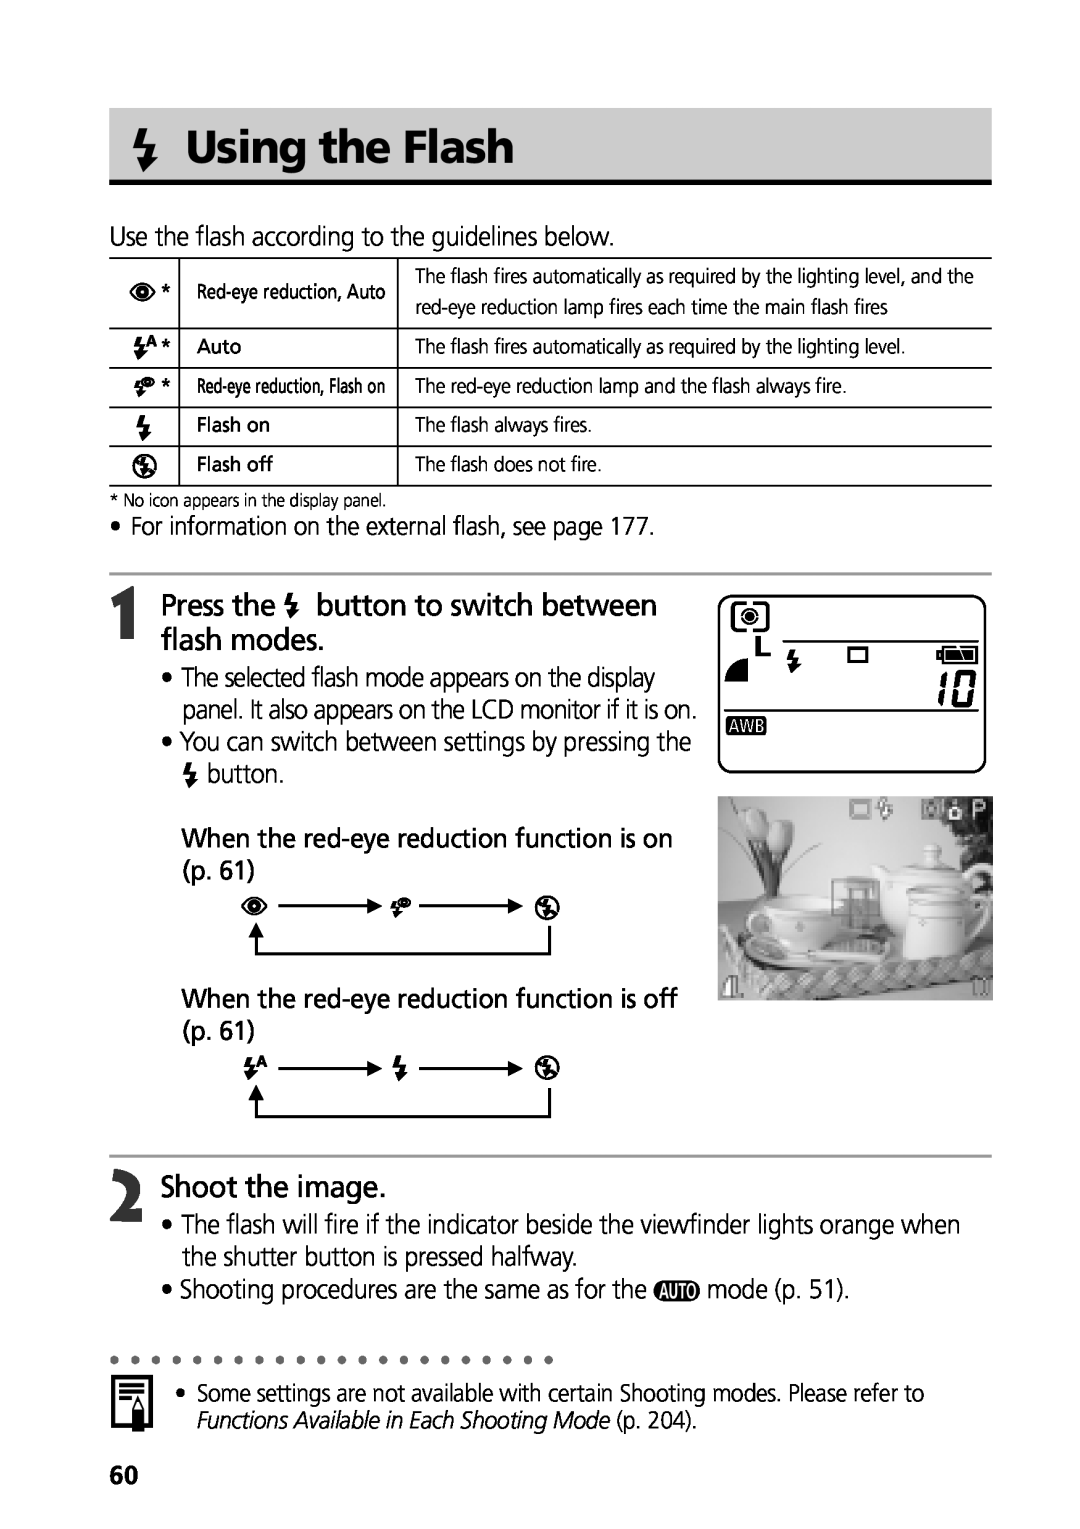 Canon G3 manual Using the Flash, Press the button to switch between flash modes, Shoot the image 